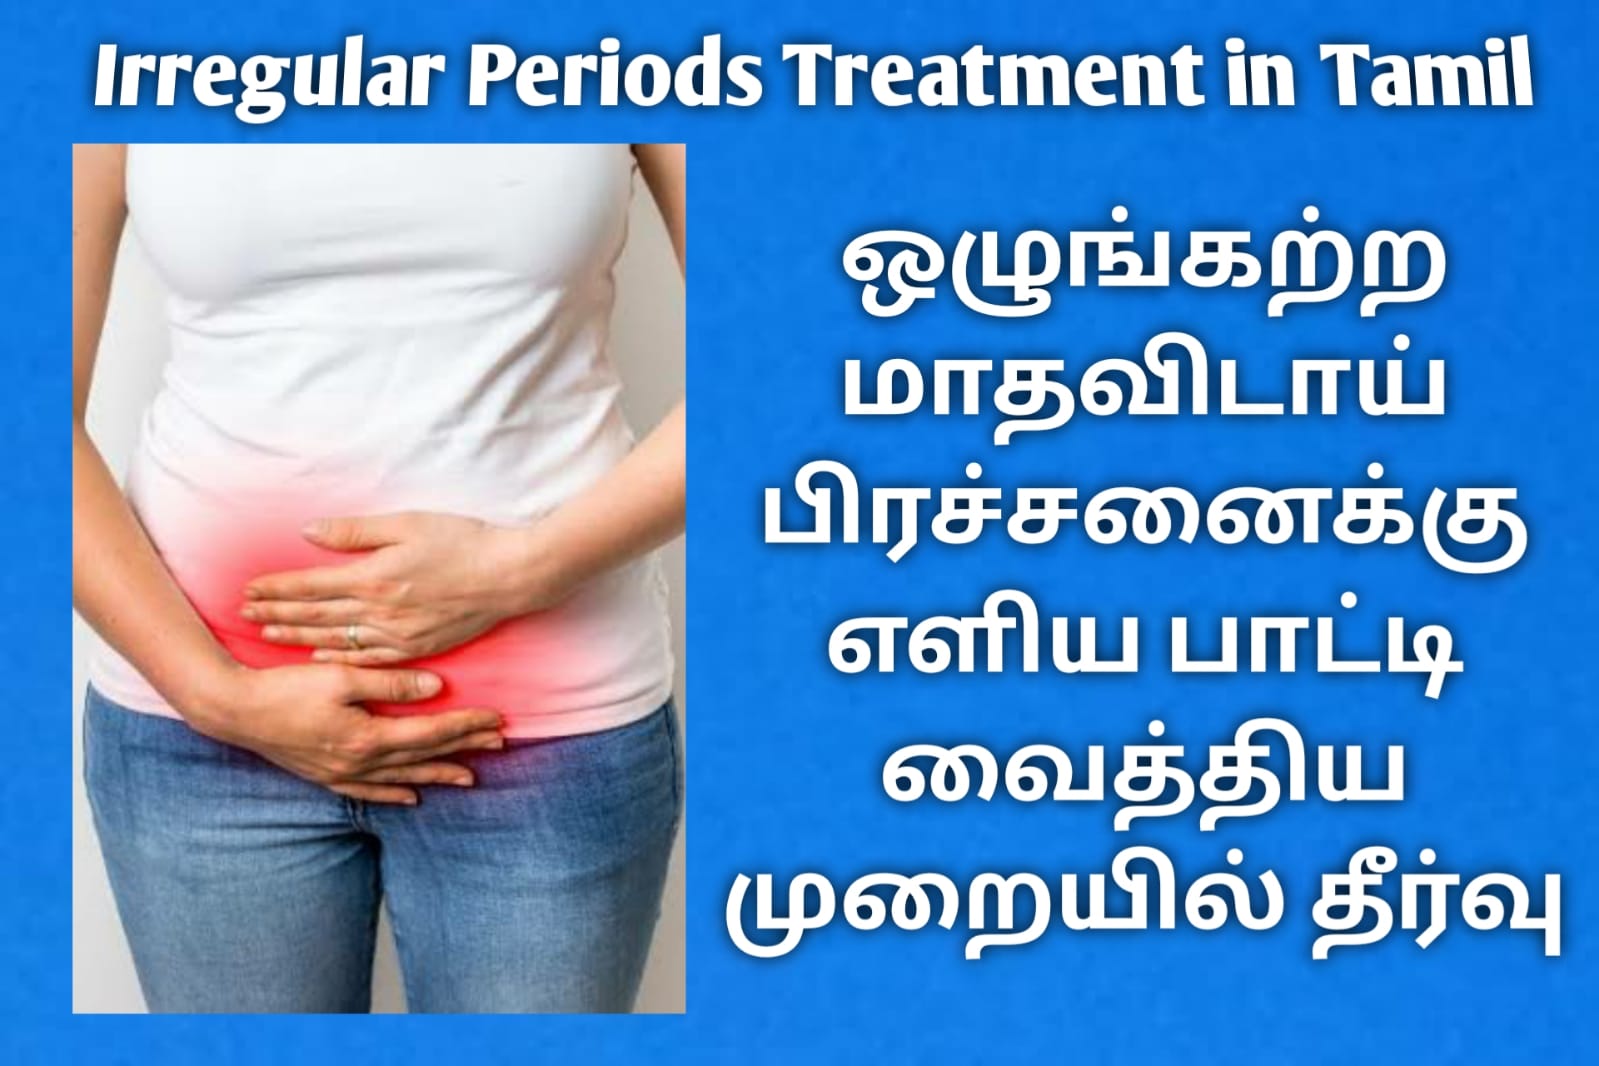 Suffering from irregular periods?? Just eat this 1 time and get permanent solution!!